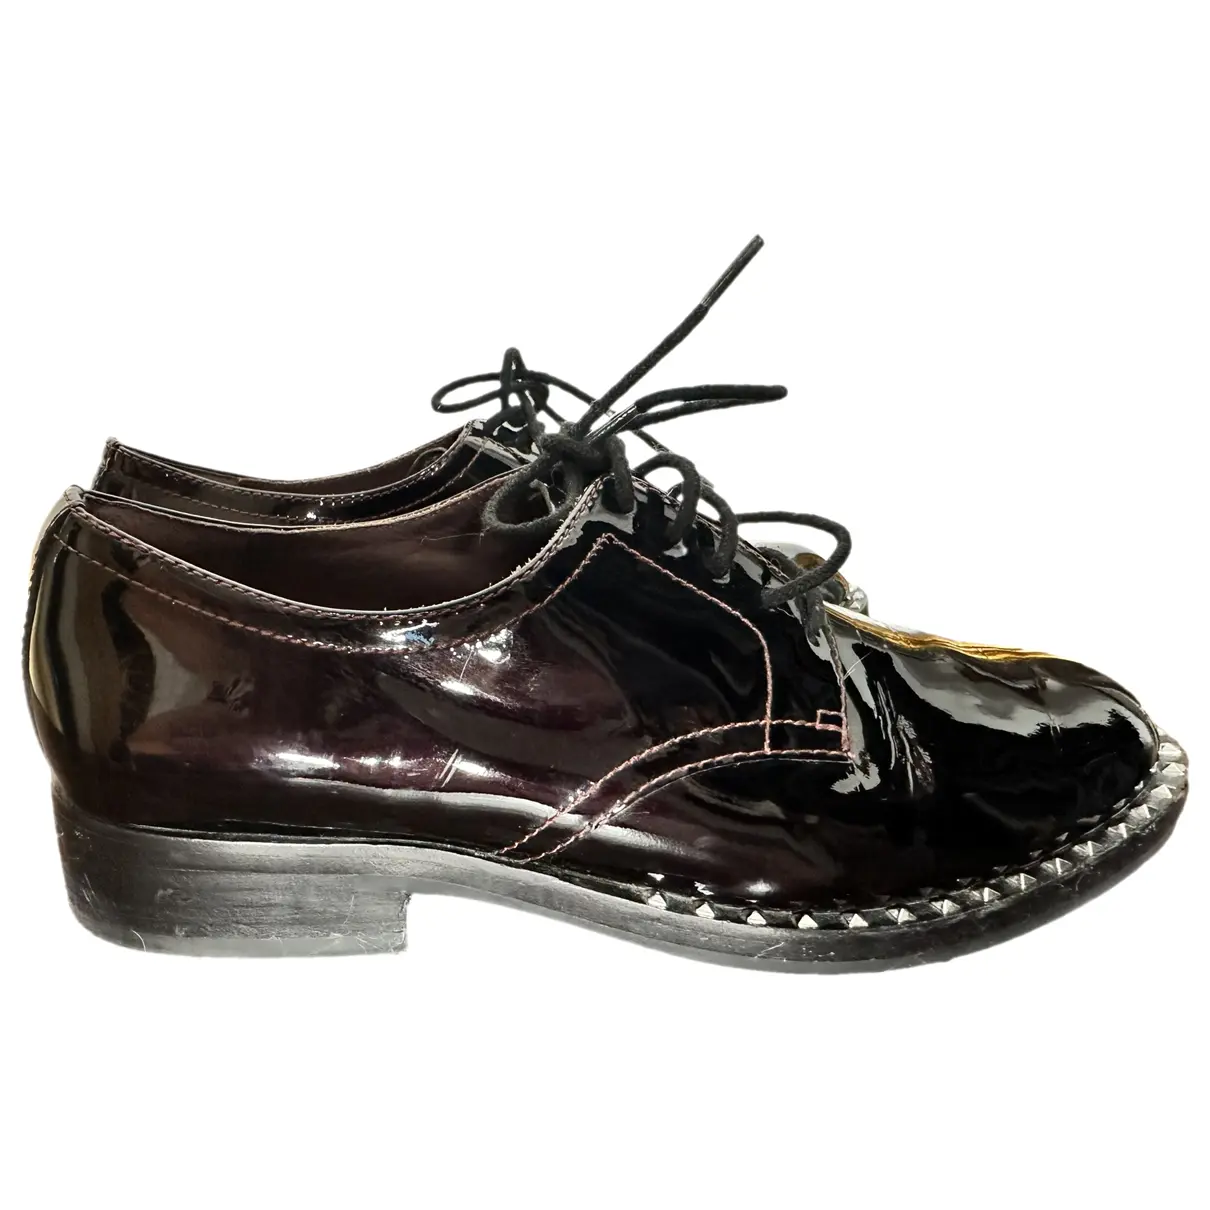 Patent leather lace ups